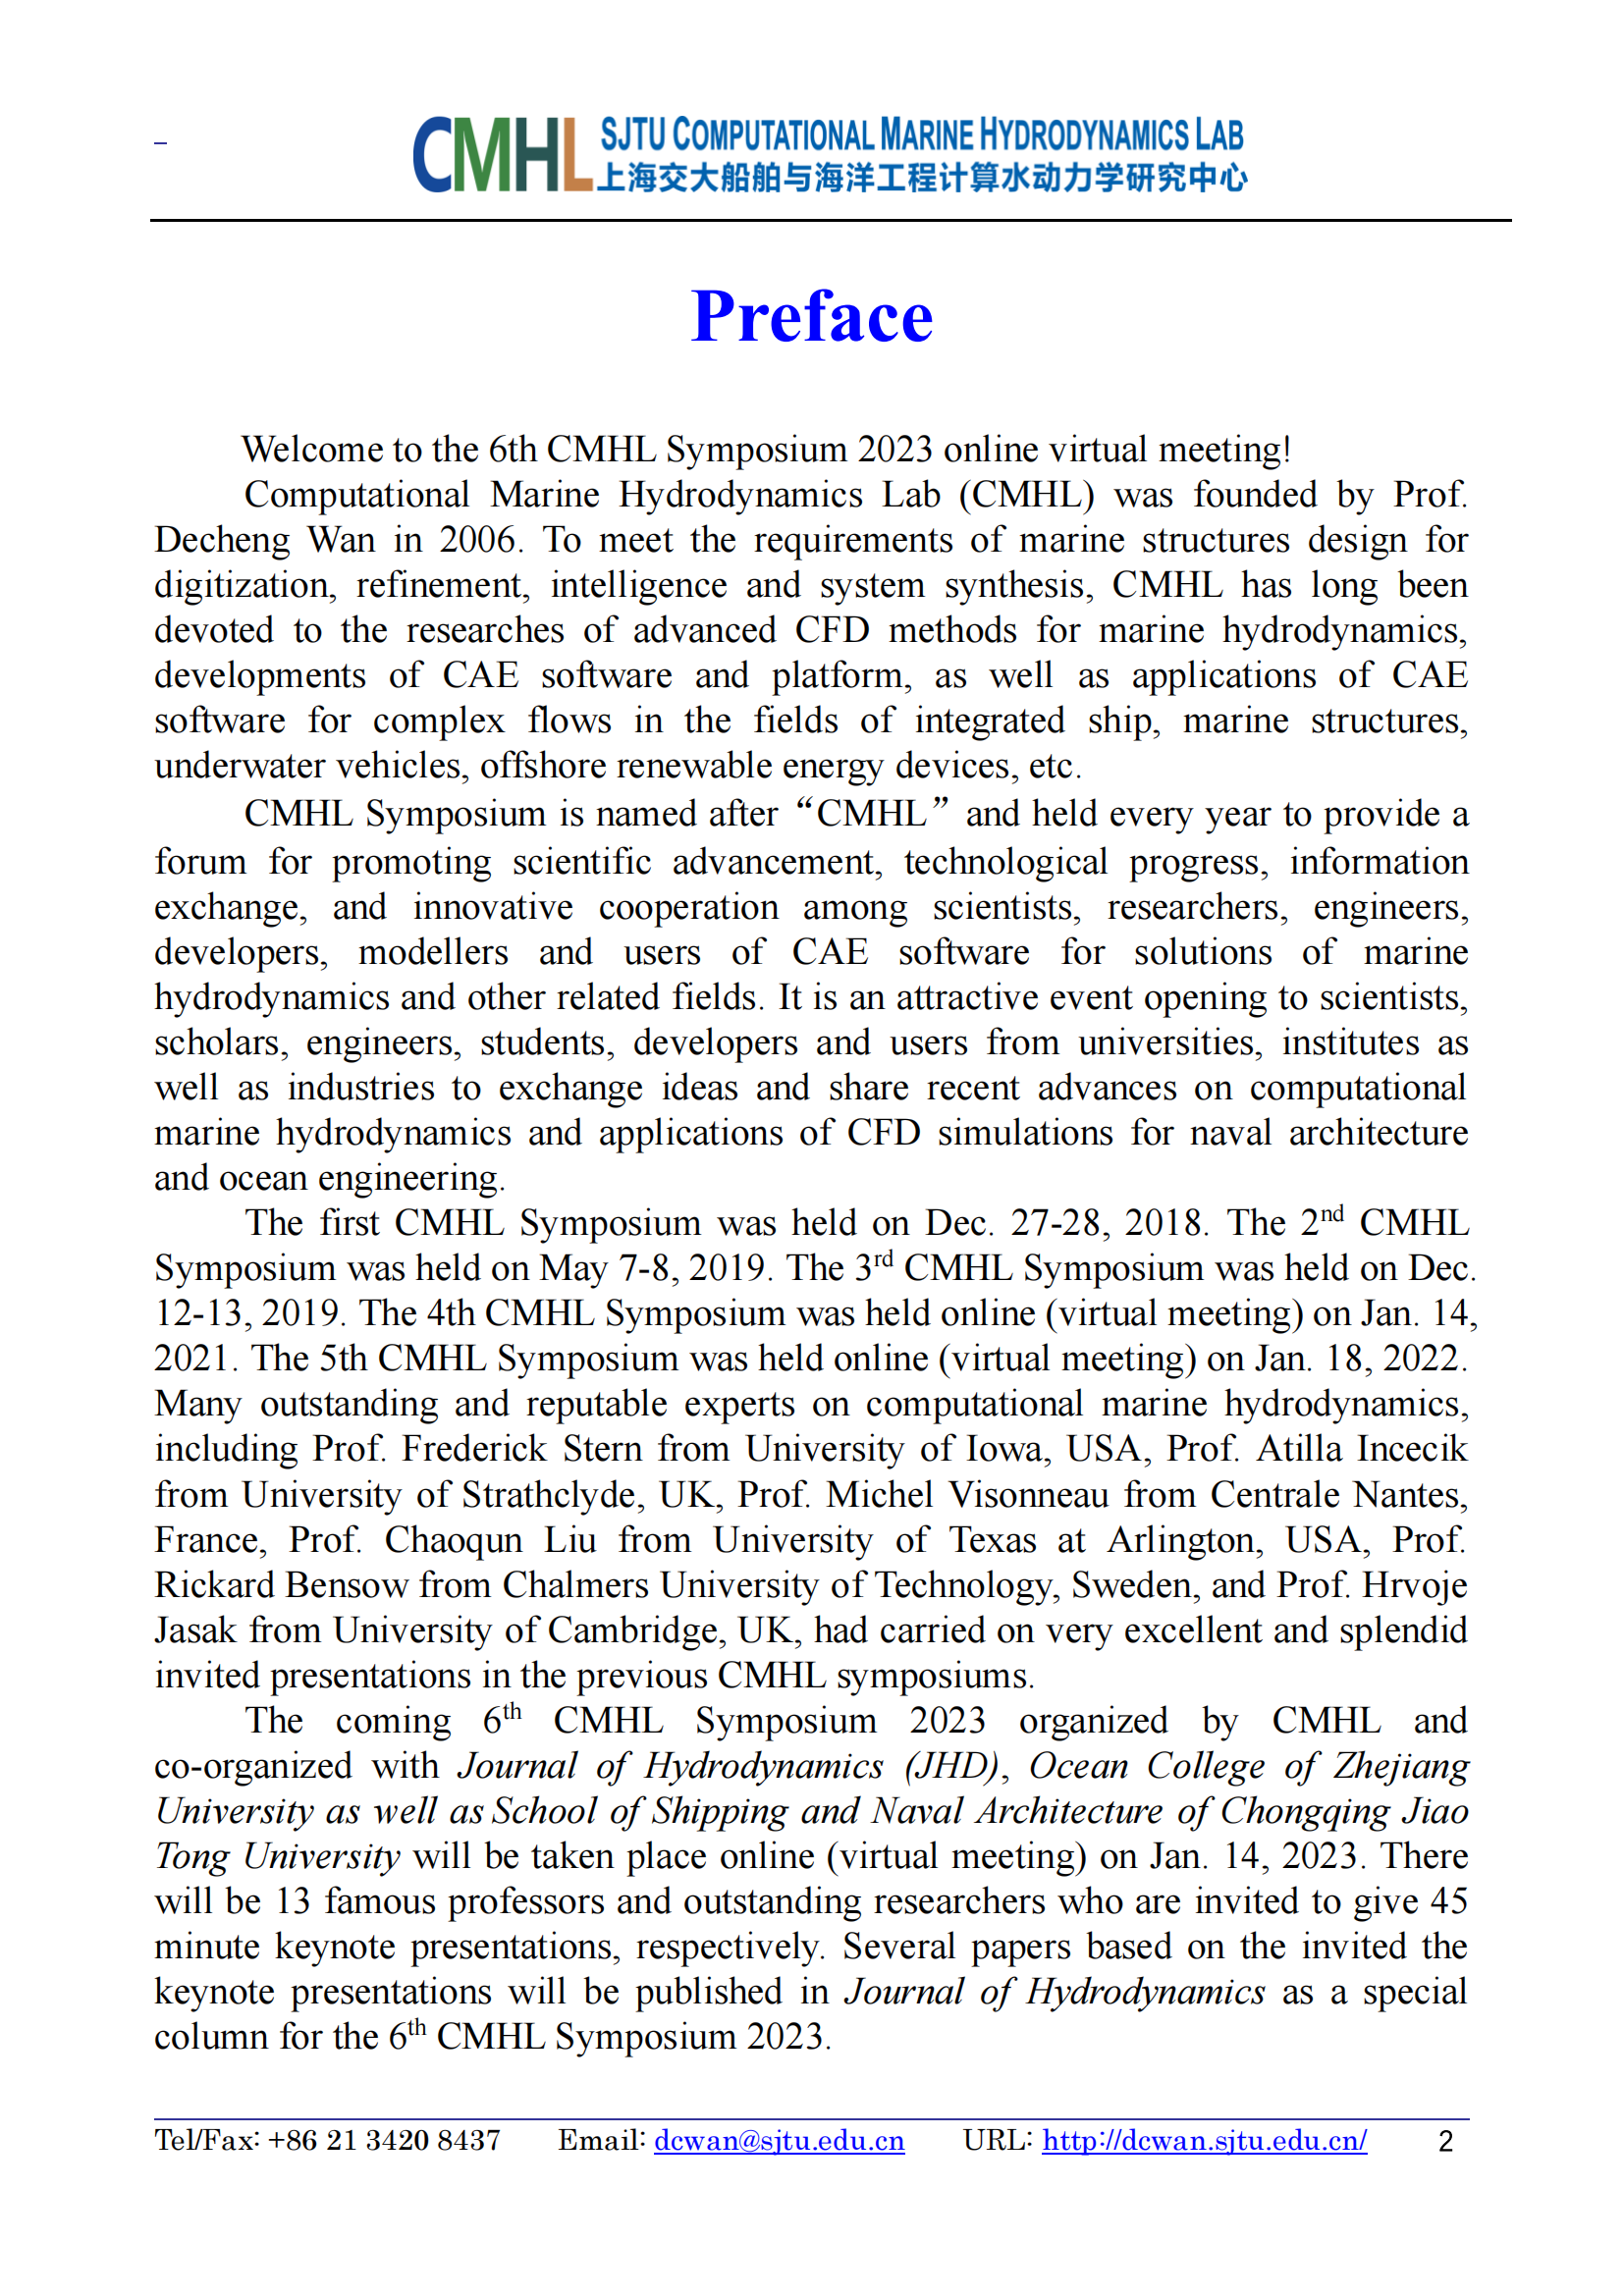 Programme for The 6th CMHL Symposium-2023-01-14(1)_02.png